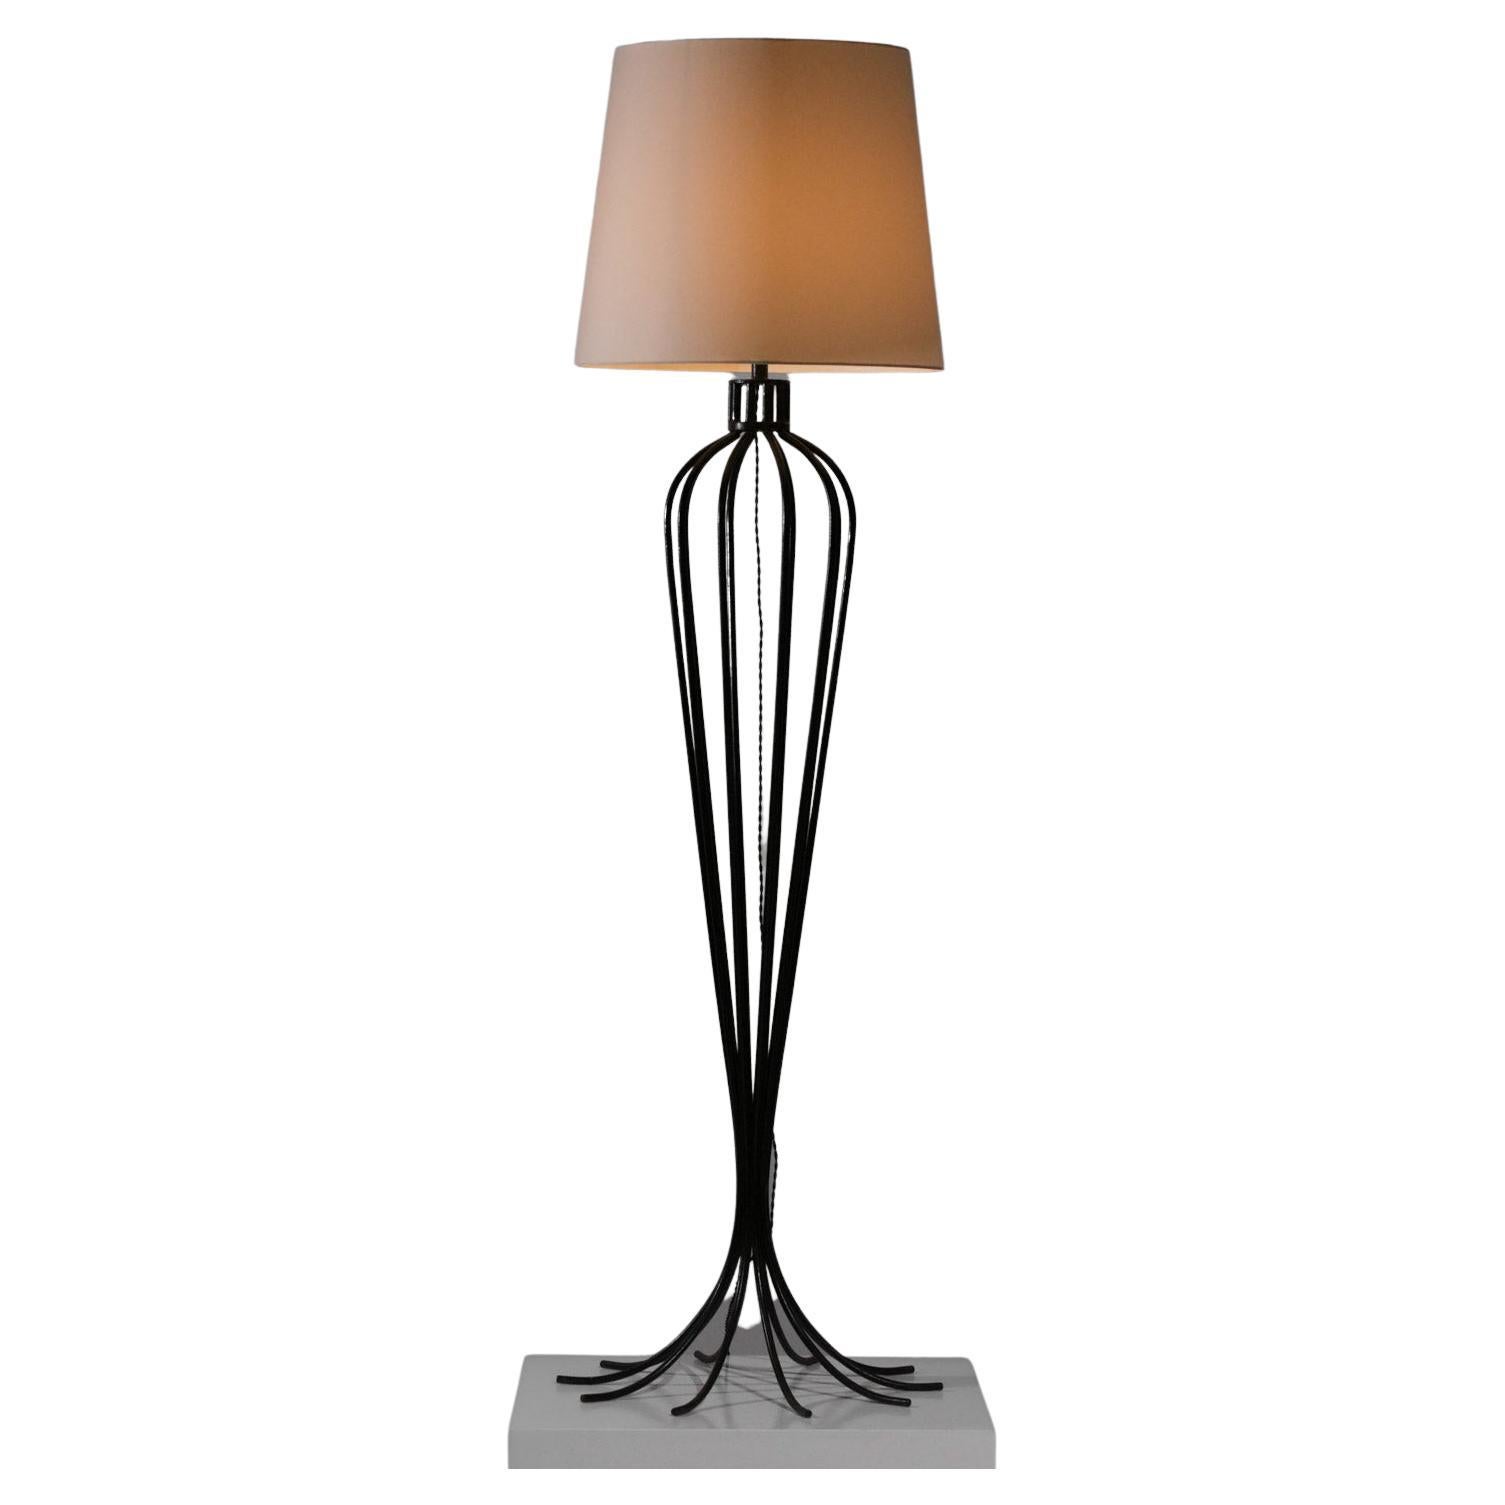 French Floor Lamp in Style of Jean Royère Solid Steel from the 50's, E300